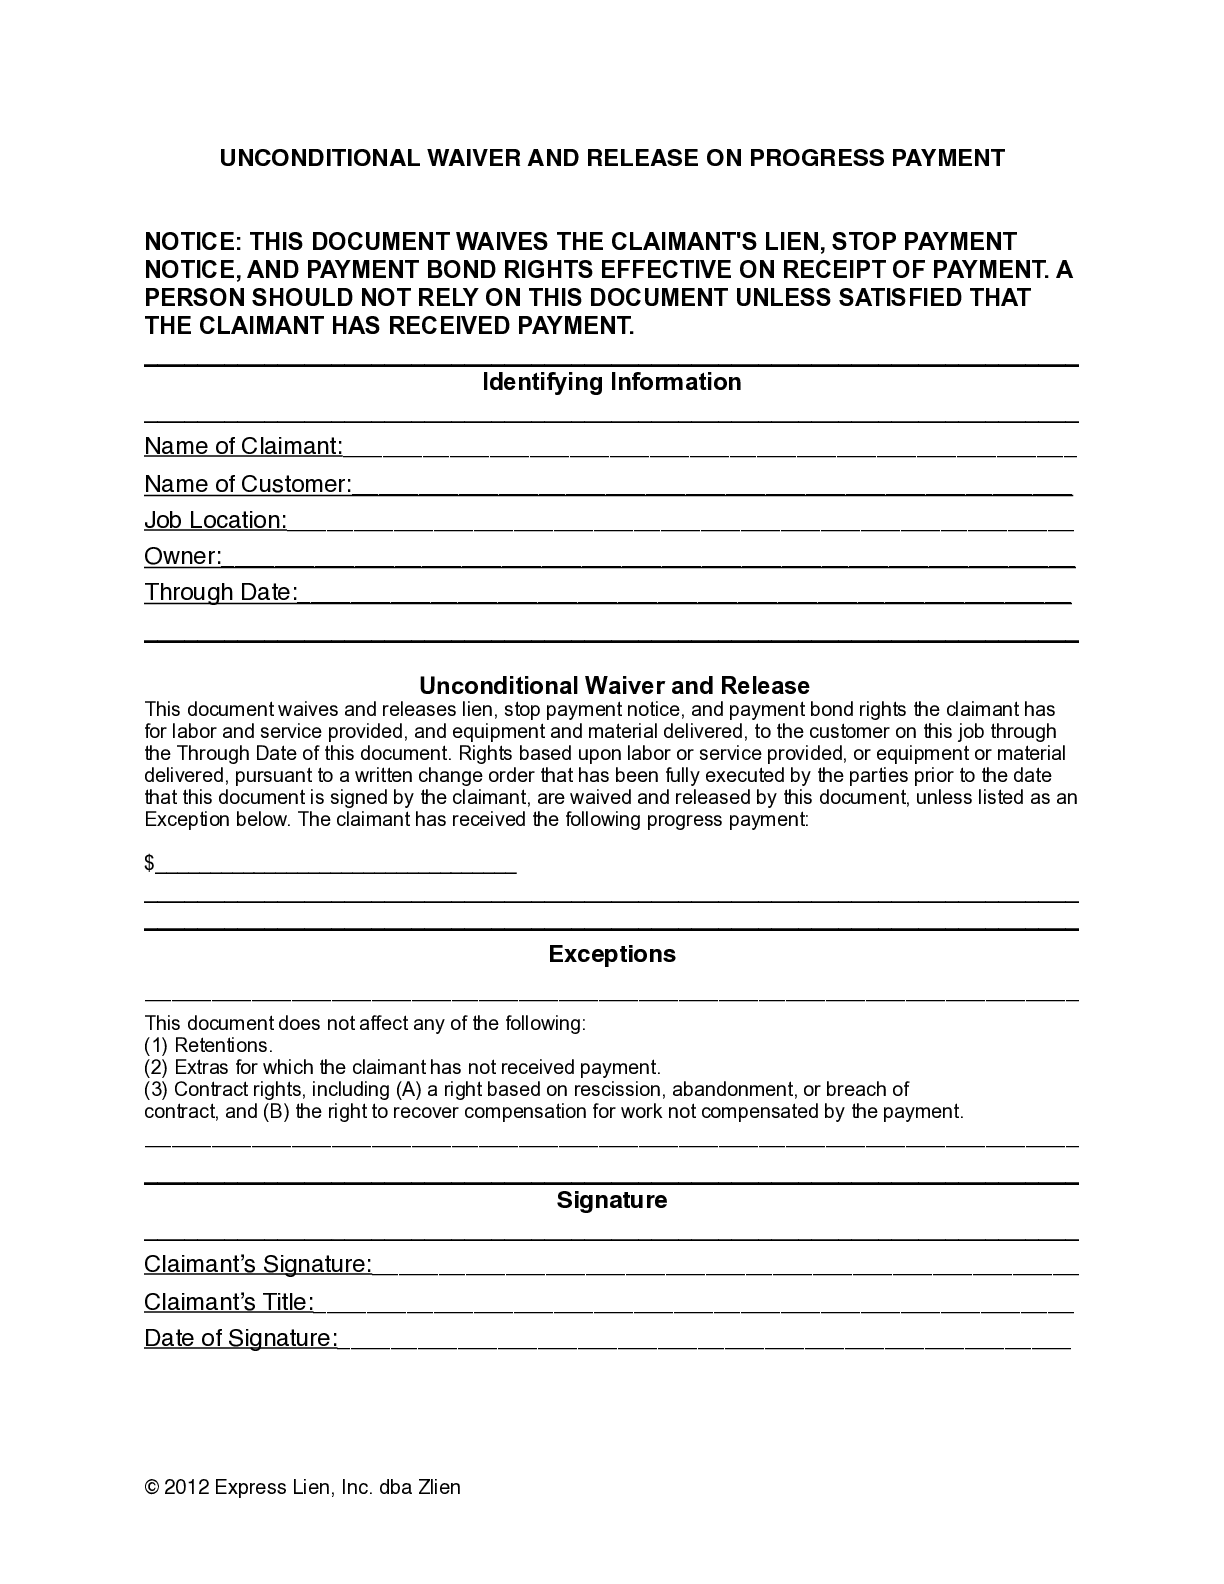 California Unconditional Waiver and Release on Progress Payment form - free from